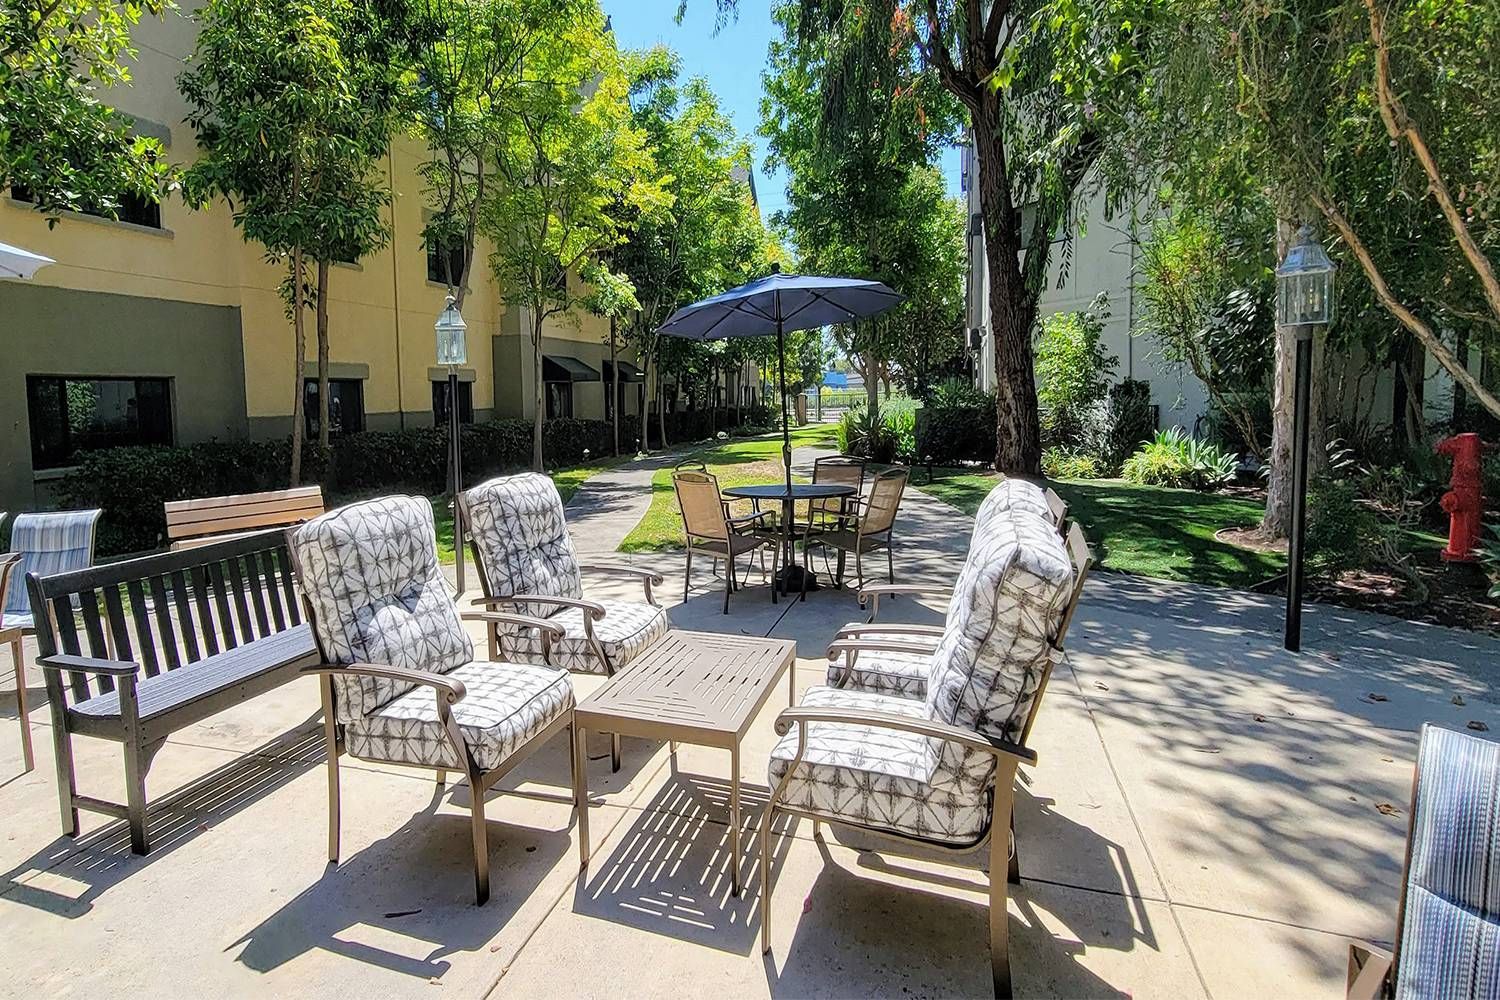 Senior living community at Westminster Terrace with outdoor patio, lush greenery, and city views.